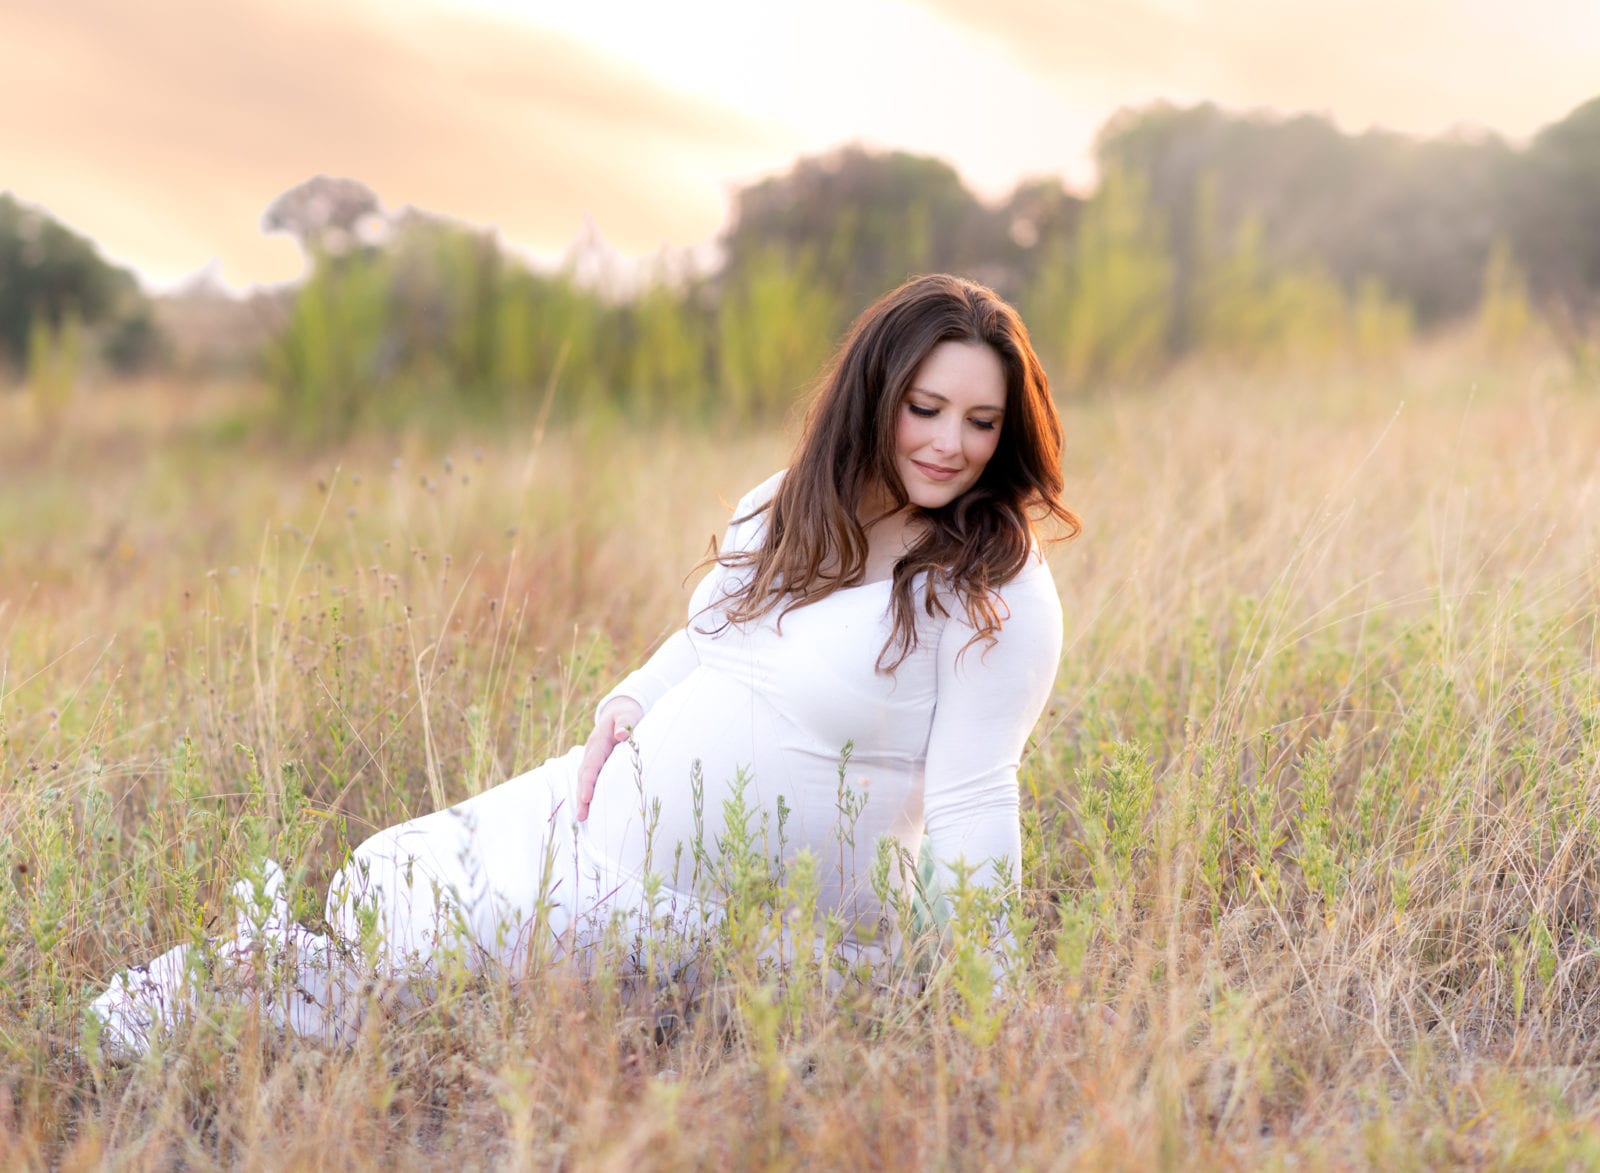 Maternity pics in a field at sunset.